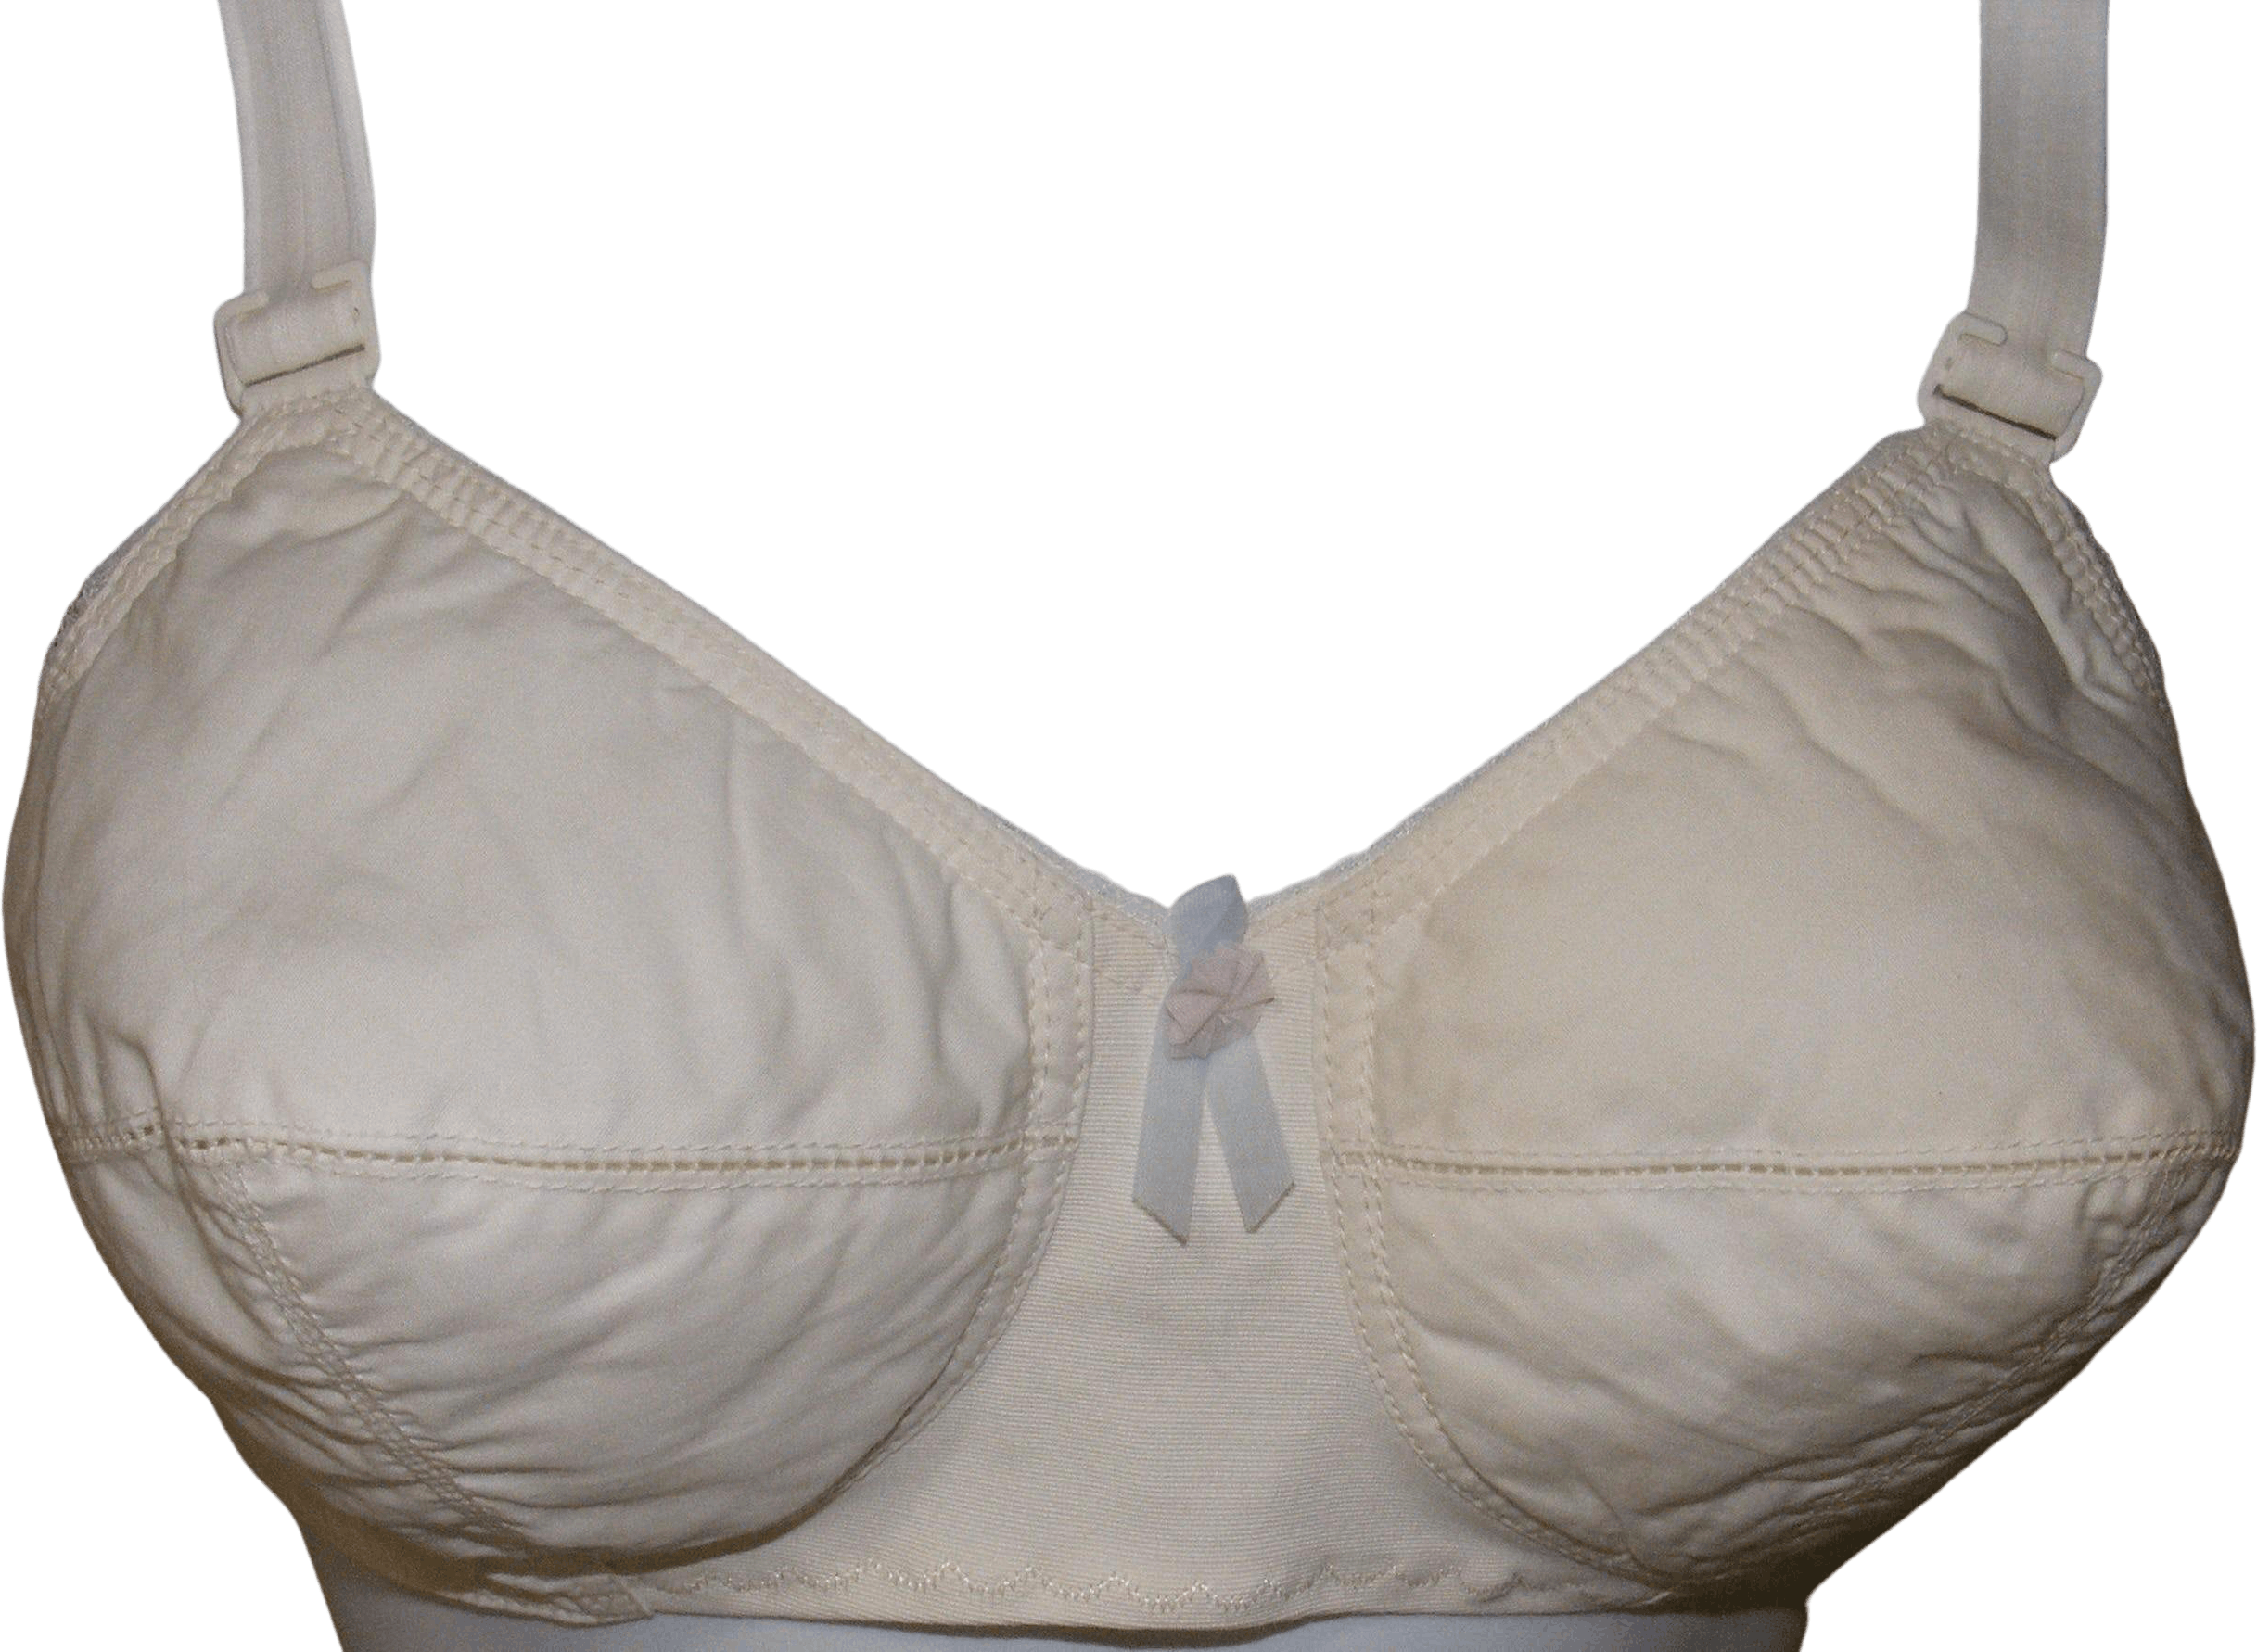 http://shopthrilling.com/cdn/shop/products/80-s-padded-bra-36-a-by-maidenform-intermezzo-by-maidenform-intermezzo-product-image__XpfwCq.png?v=1638229279